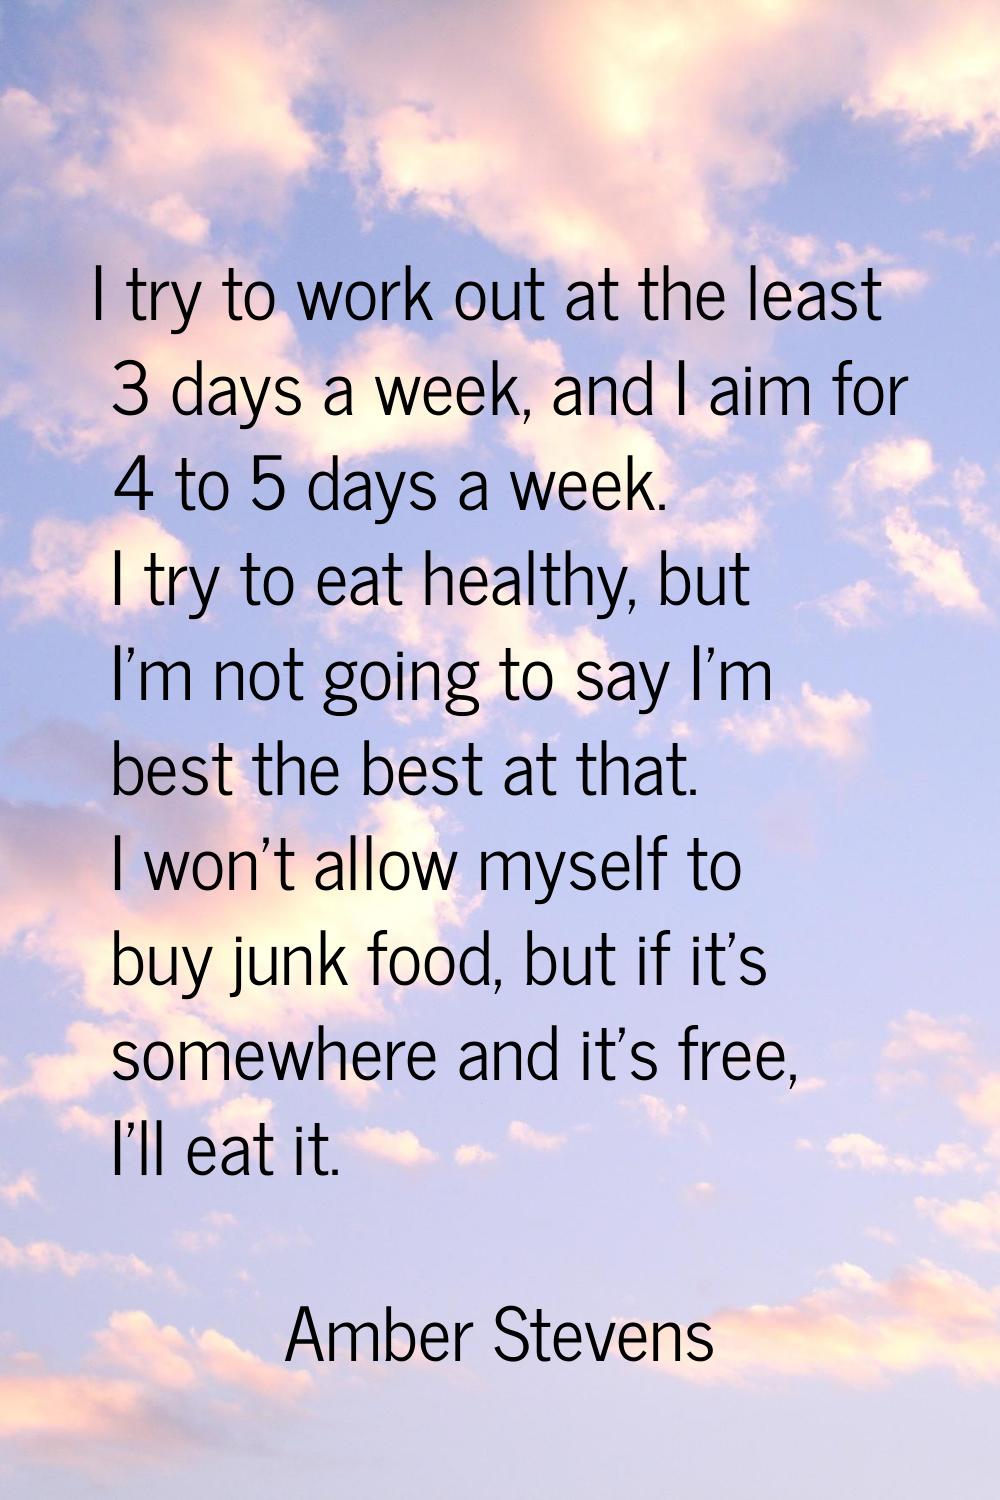 I try to work out at the least 3 days a week, and I aim for 4 to 5 days a week. I try to eat health